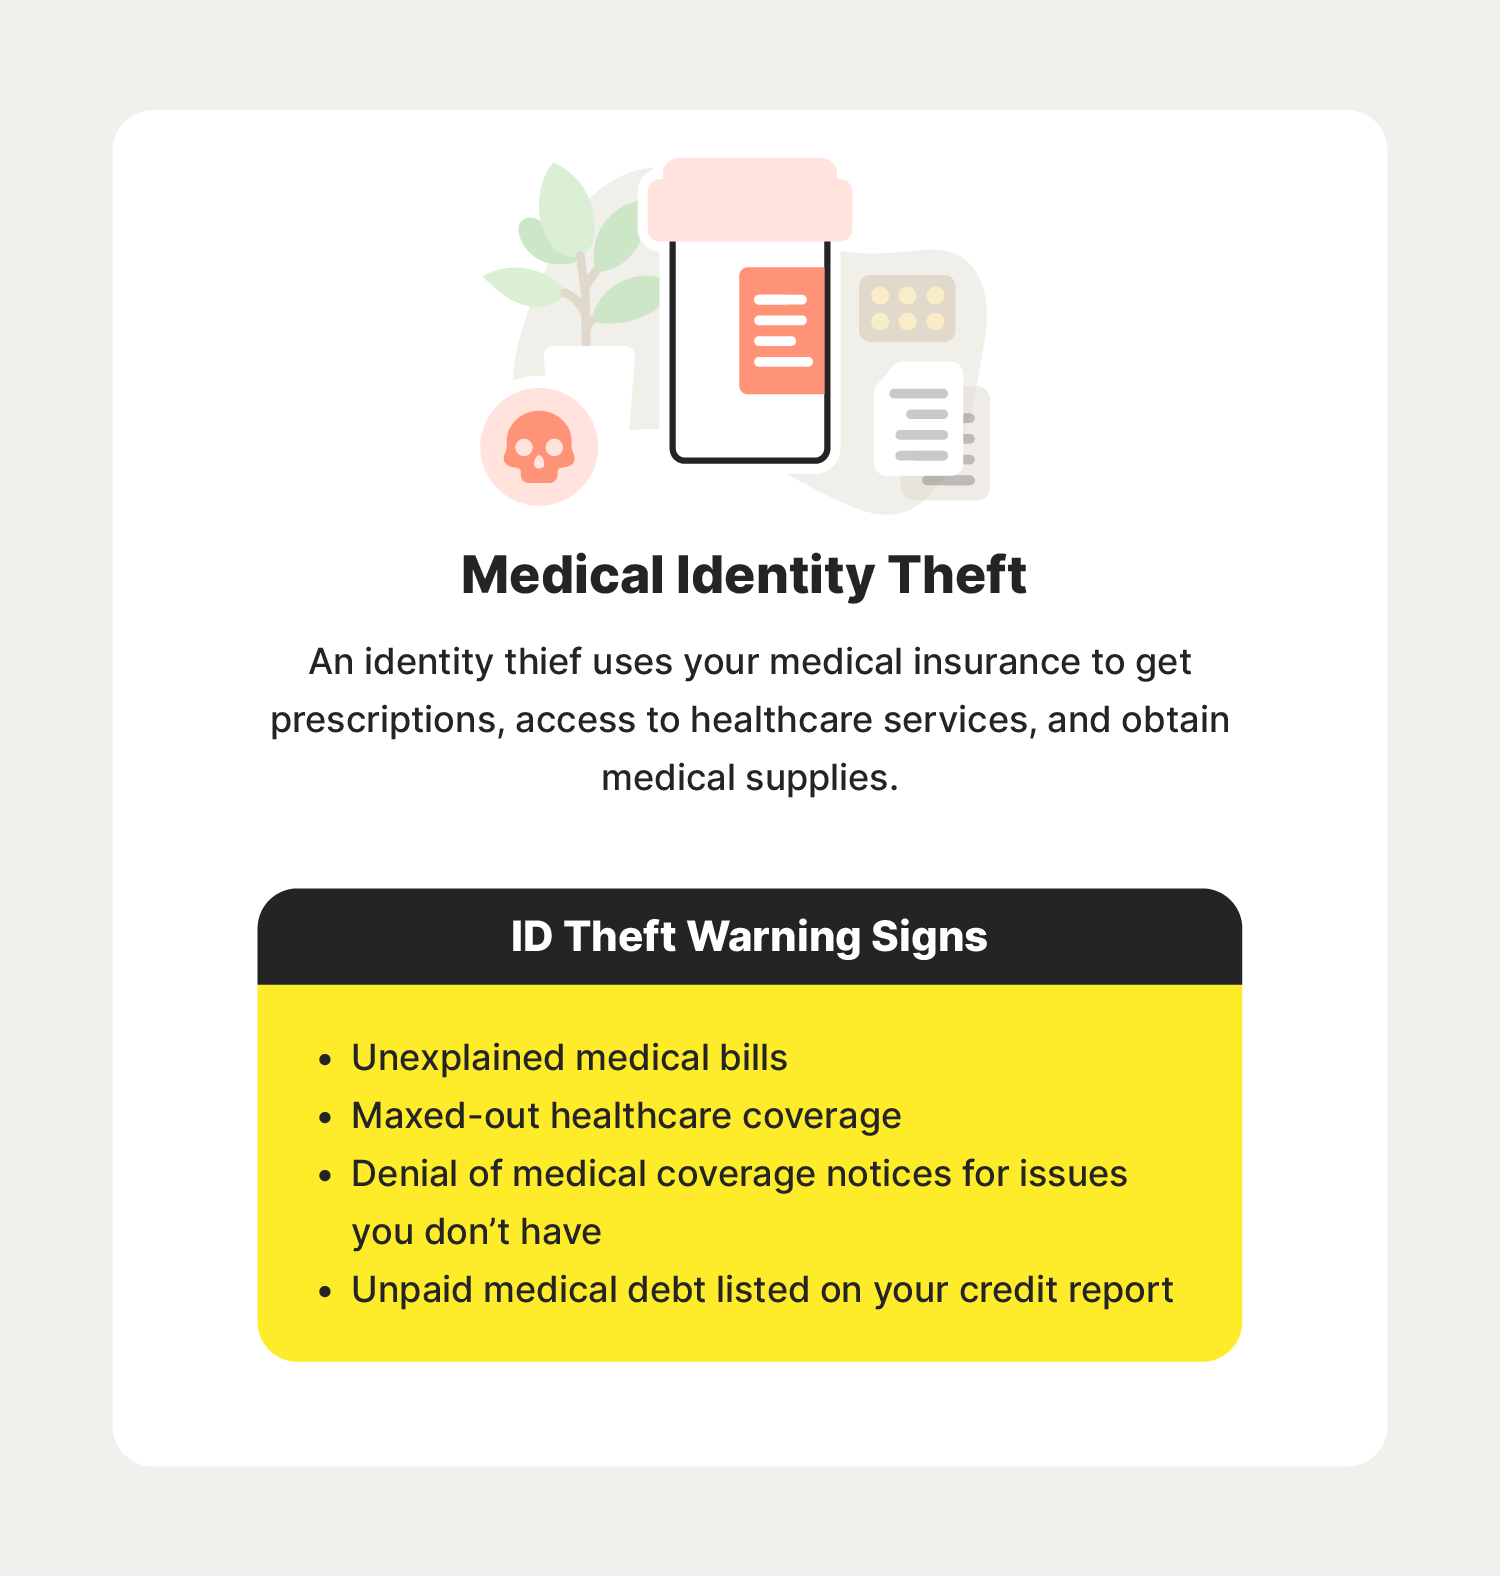 A graphic describes medical identity theft, a type of identity theft to keep an eye on when learning how to avoid identity theft.